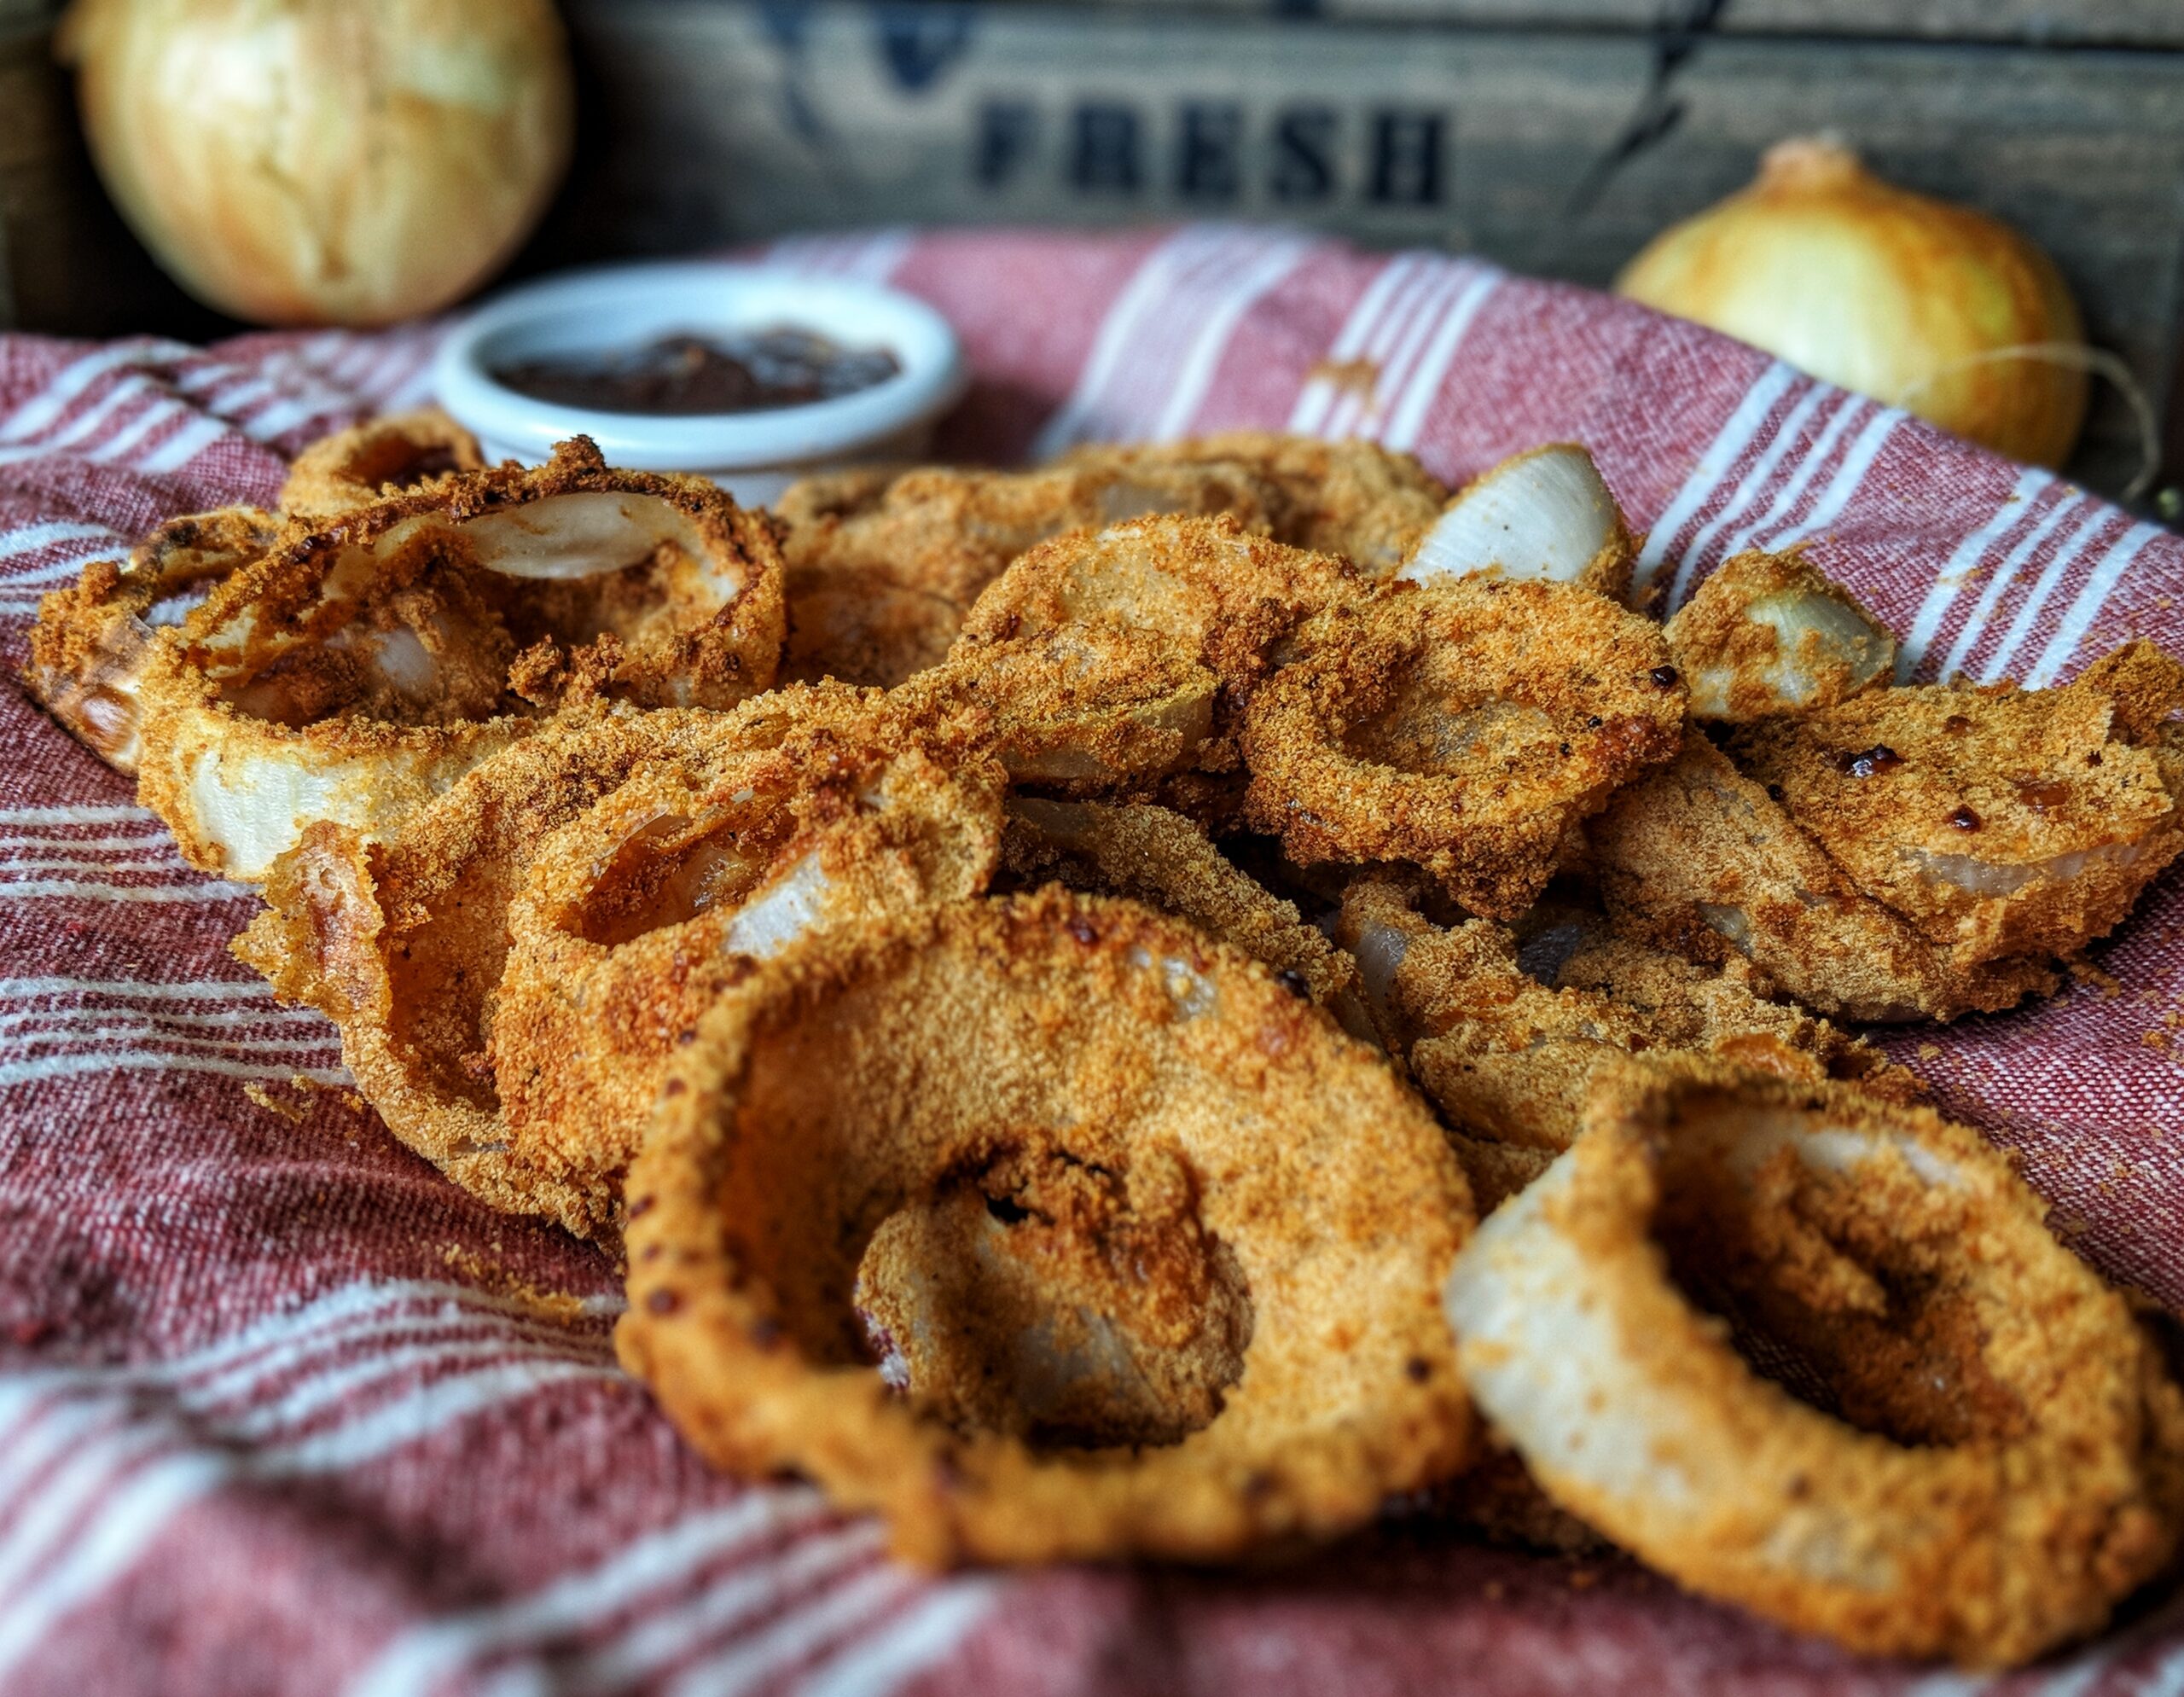 These healthy onion rings are crisped to perfection in an air fryer. They're gluten-free, dairy-free and Paleo-friendly.